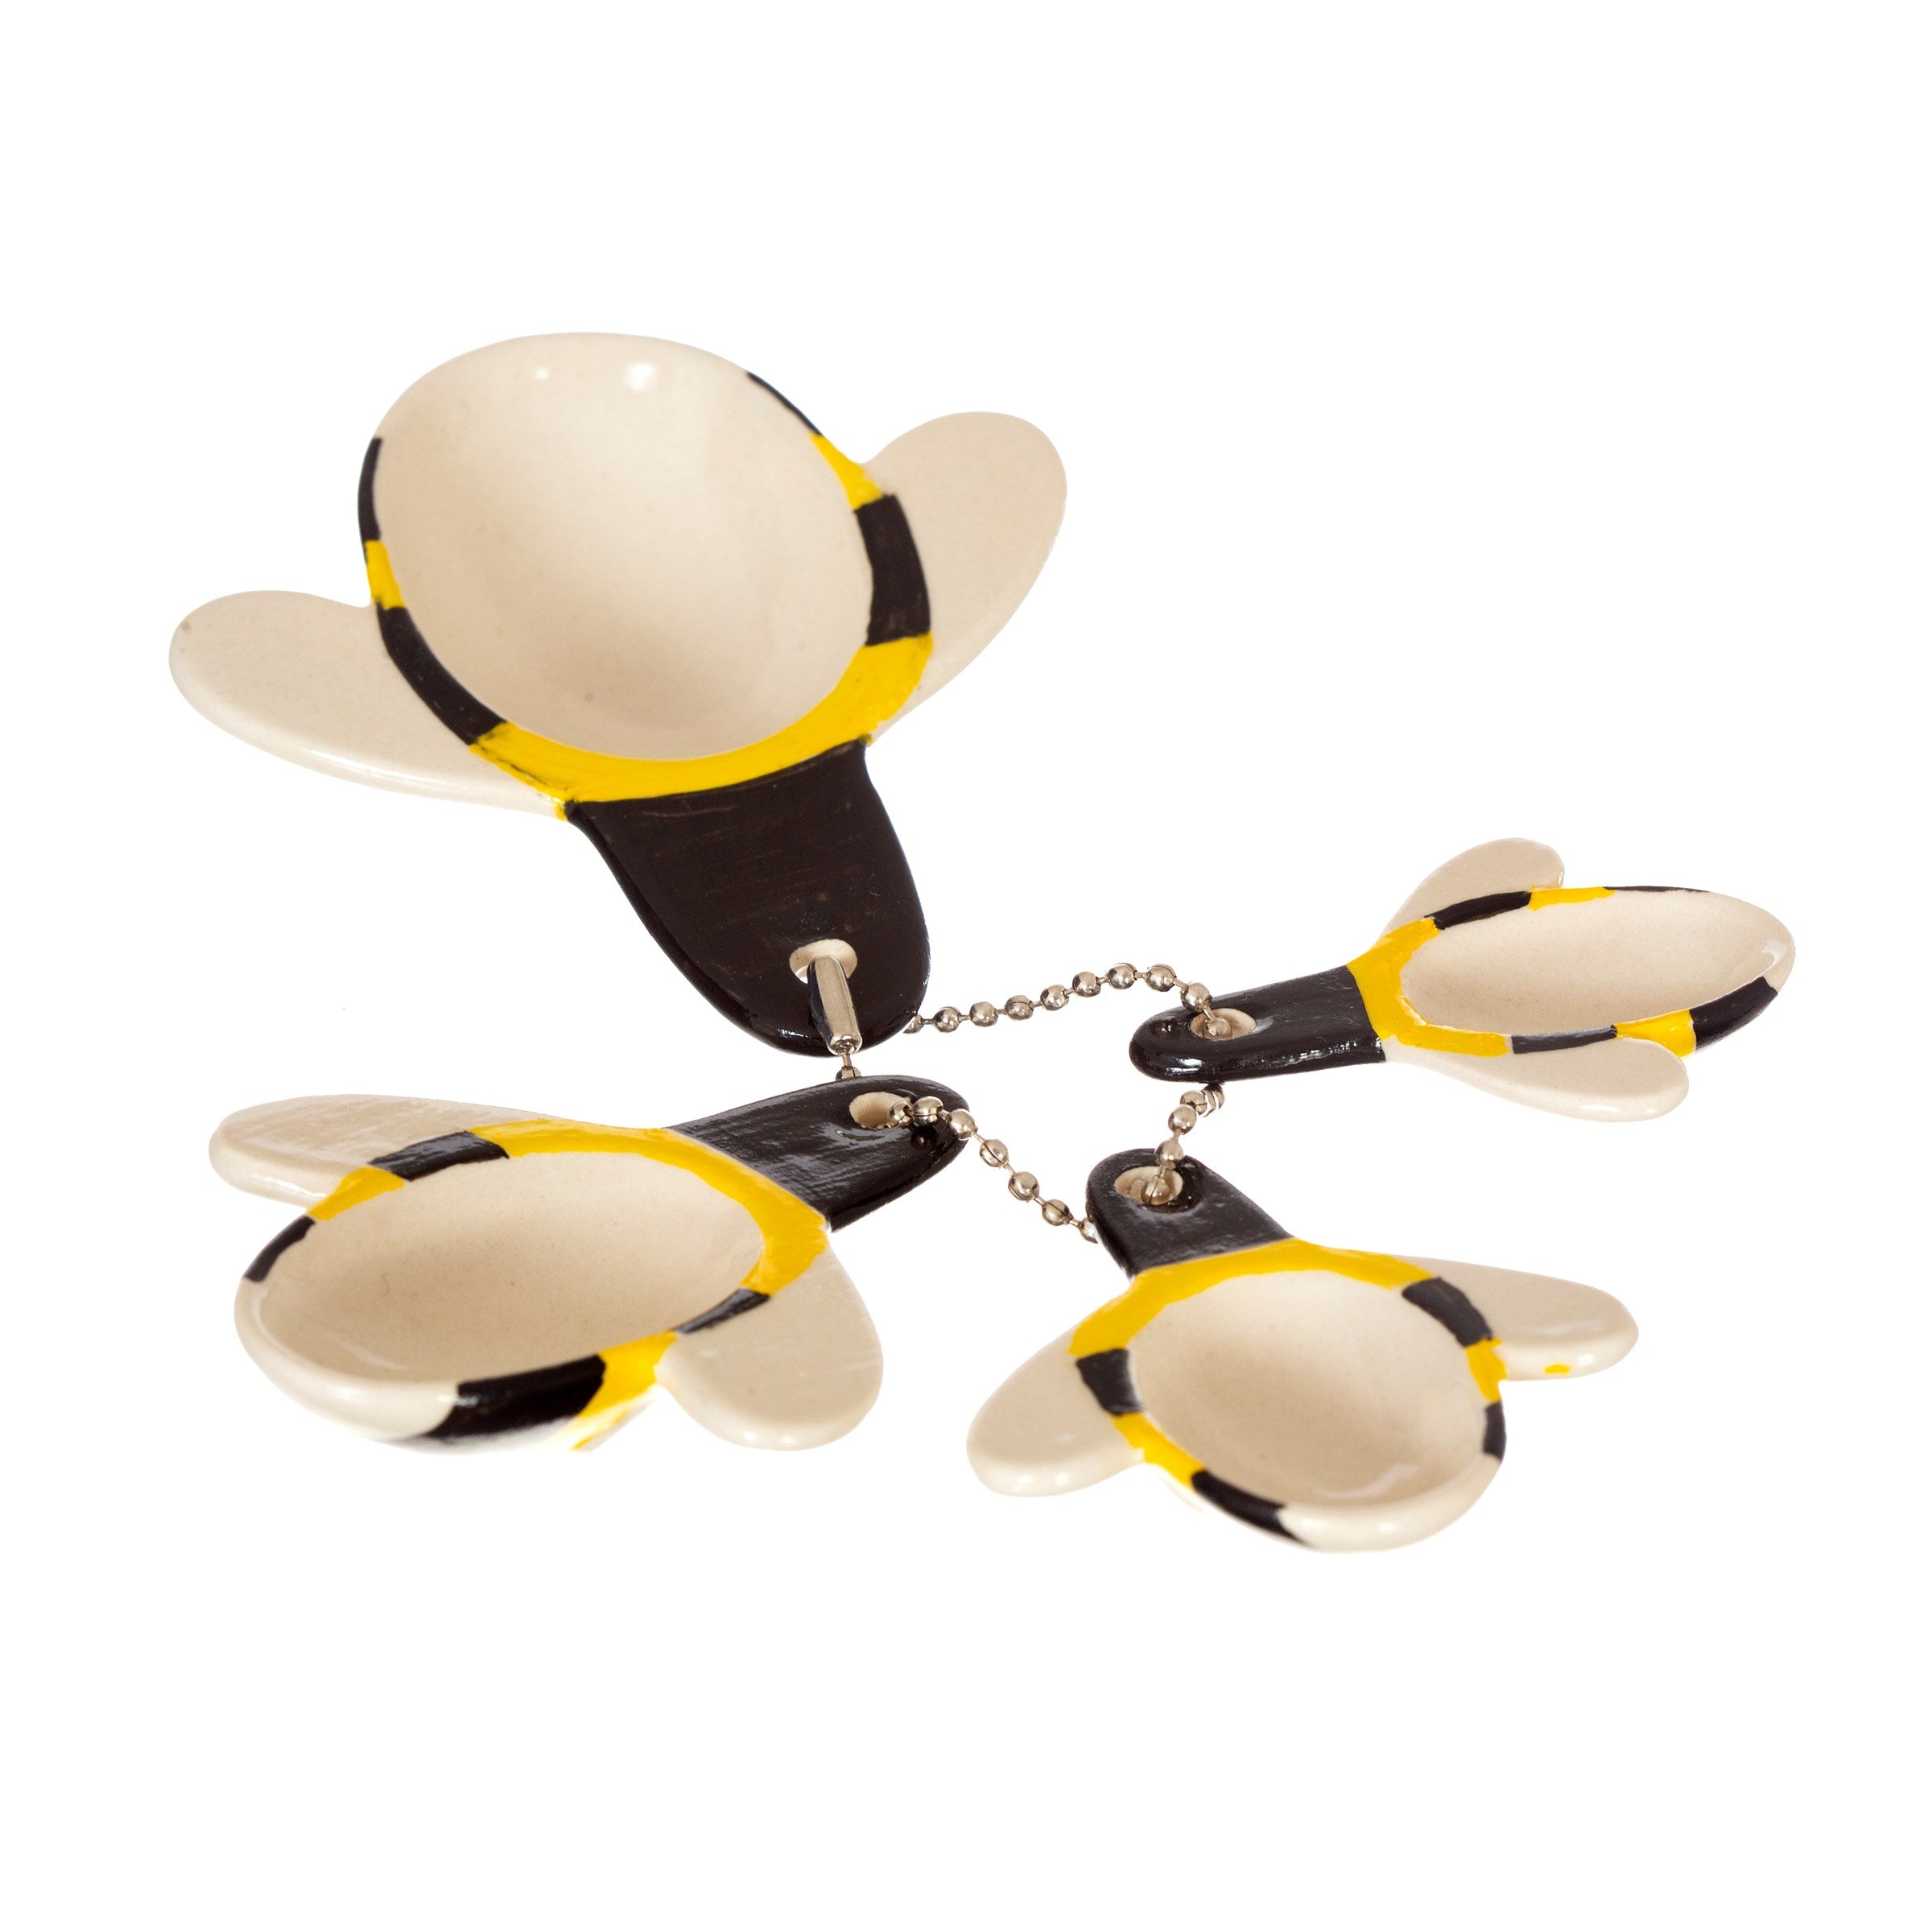 Busy bee measuring spoons